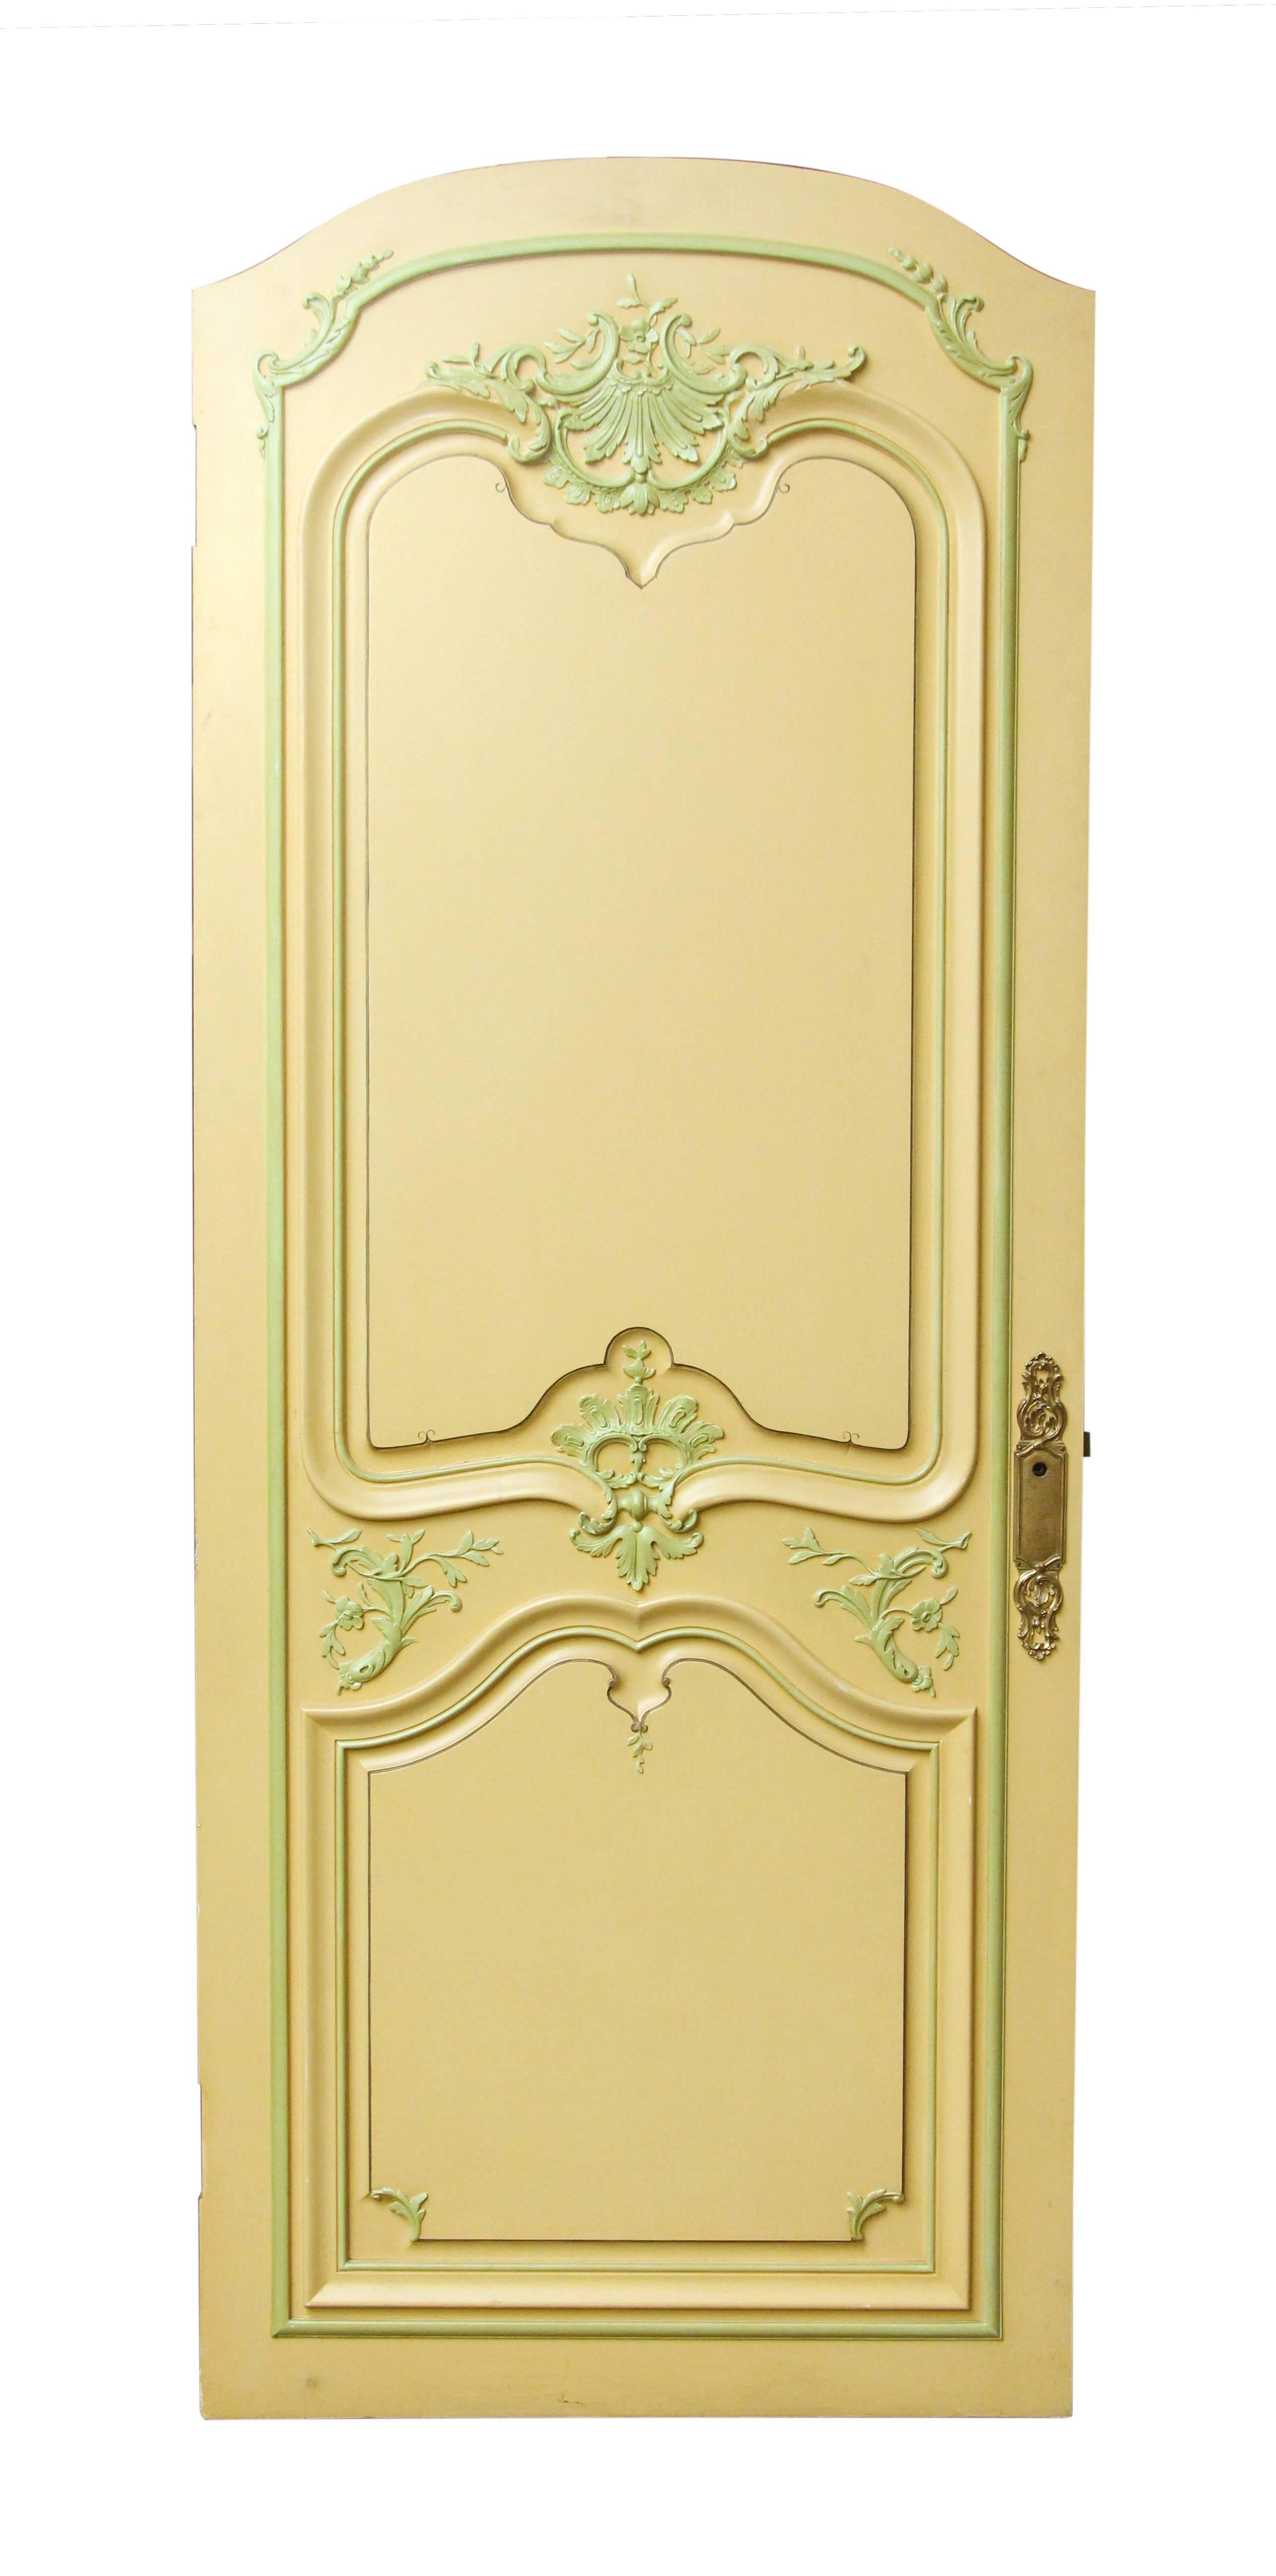 Three cream colored carved wood doors with green floral decorative designs along the panels. Features original decorative back plates attached. One pair and one single available. The single door is plain and white on the opposite side. Priced as a